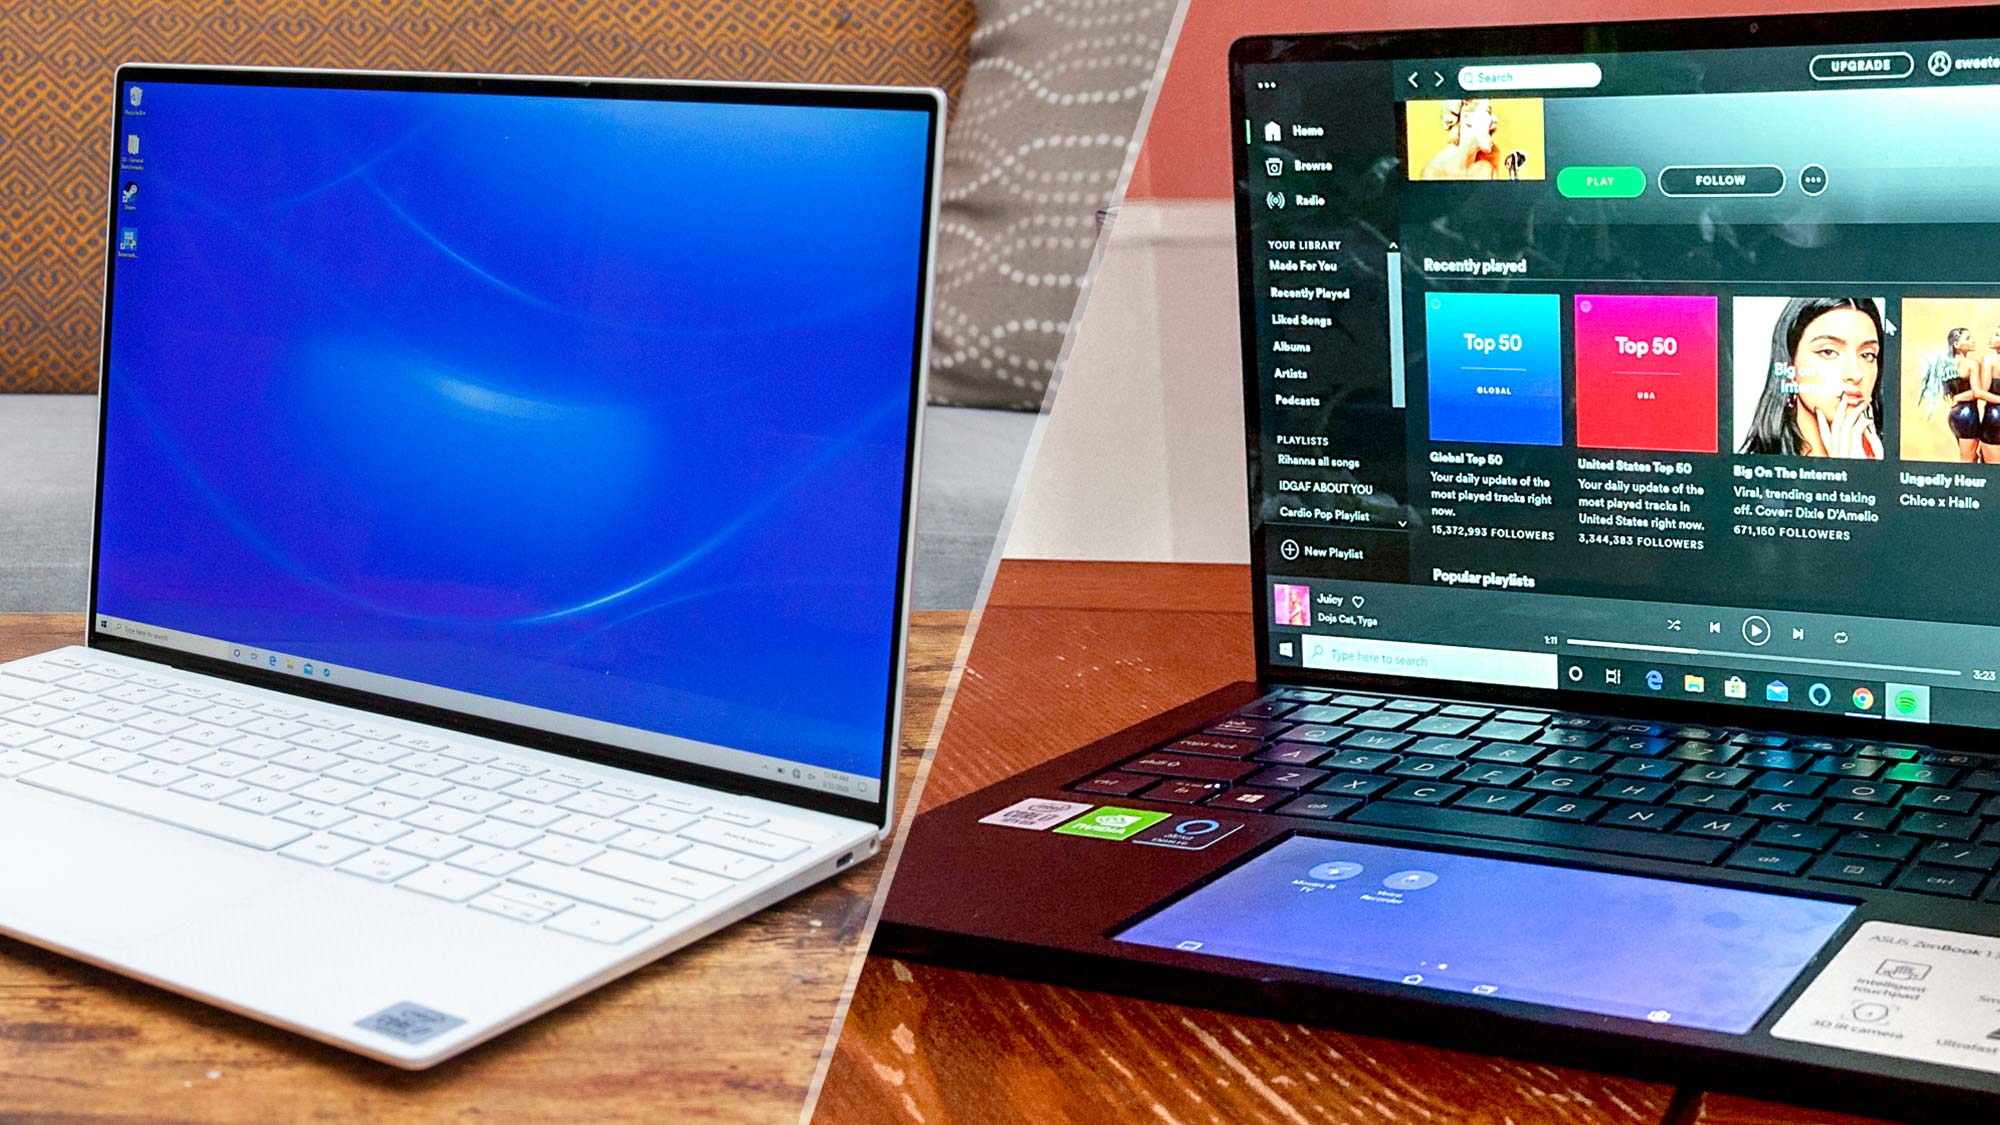 Asus ZenBook 13 vs. Dell XPS 13: Which Laptop Should You Buy? 1